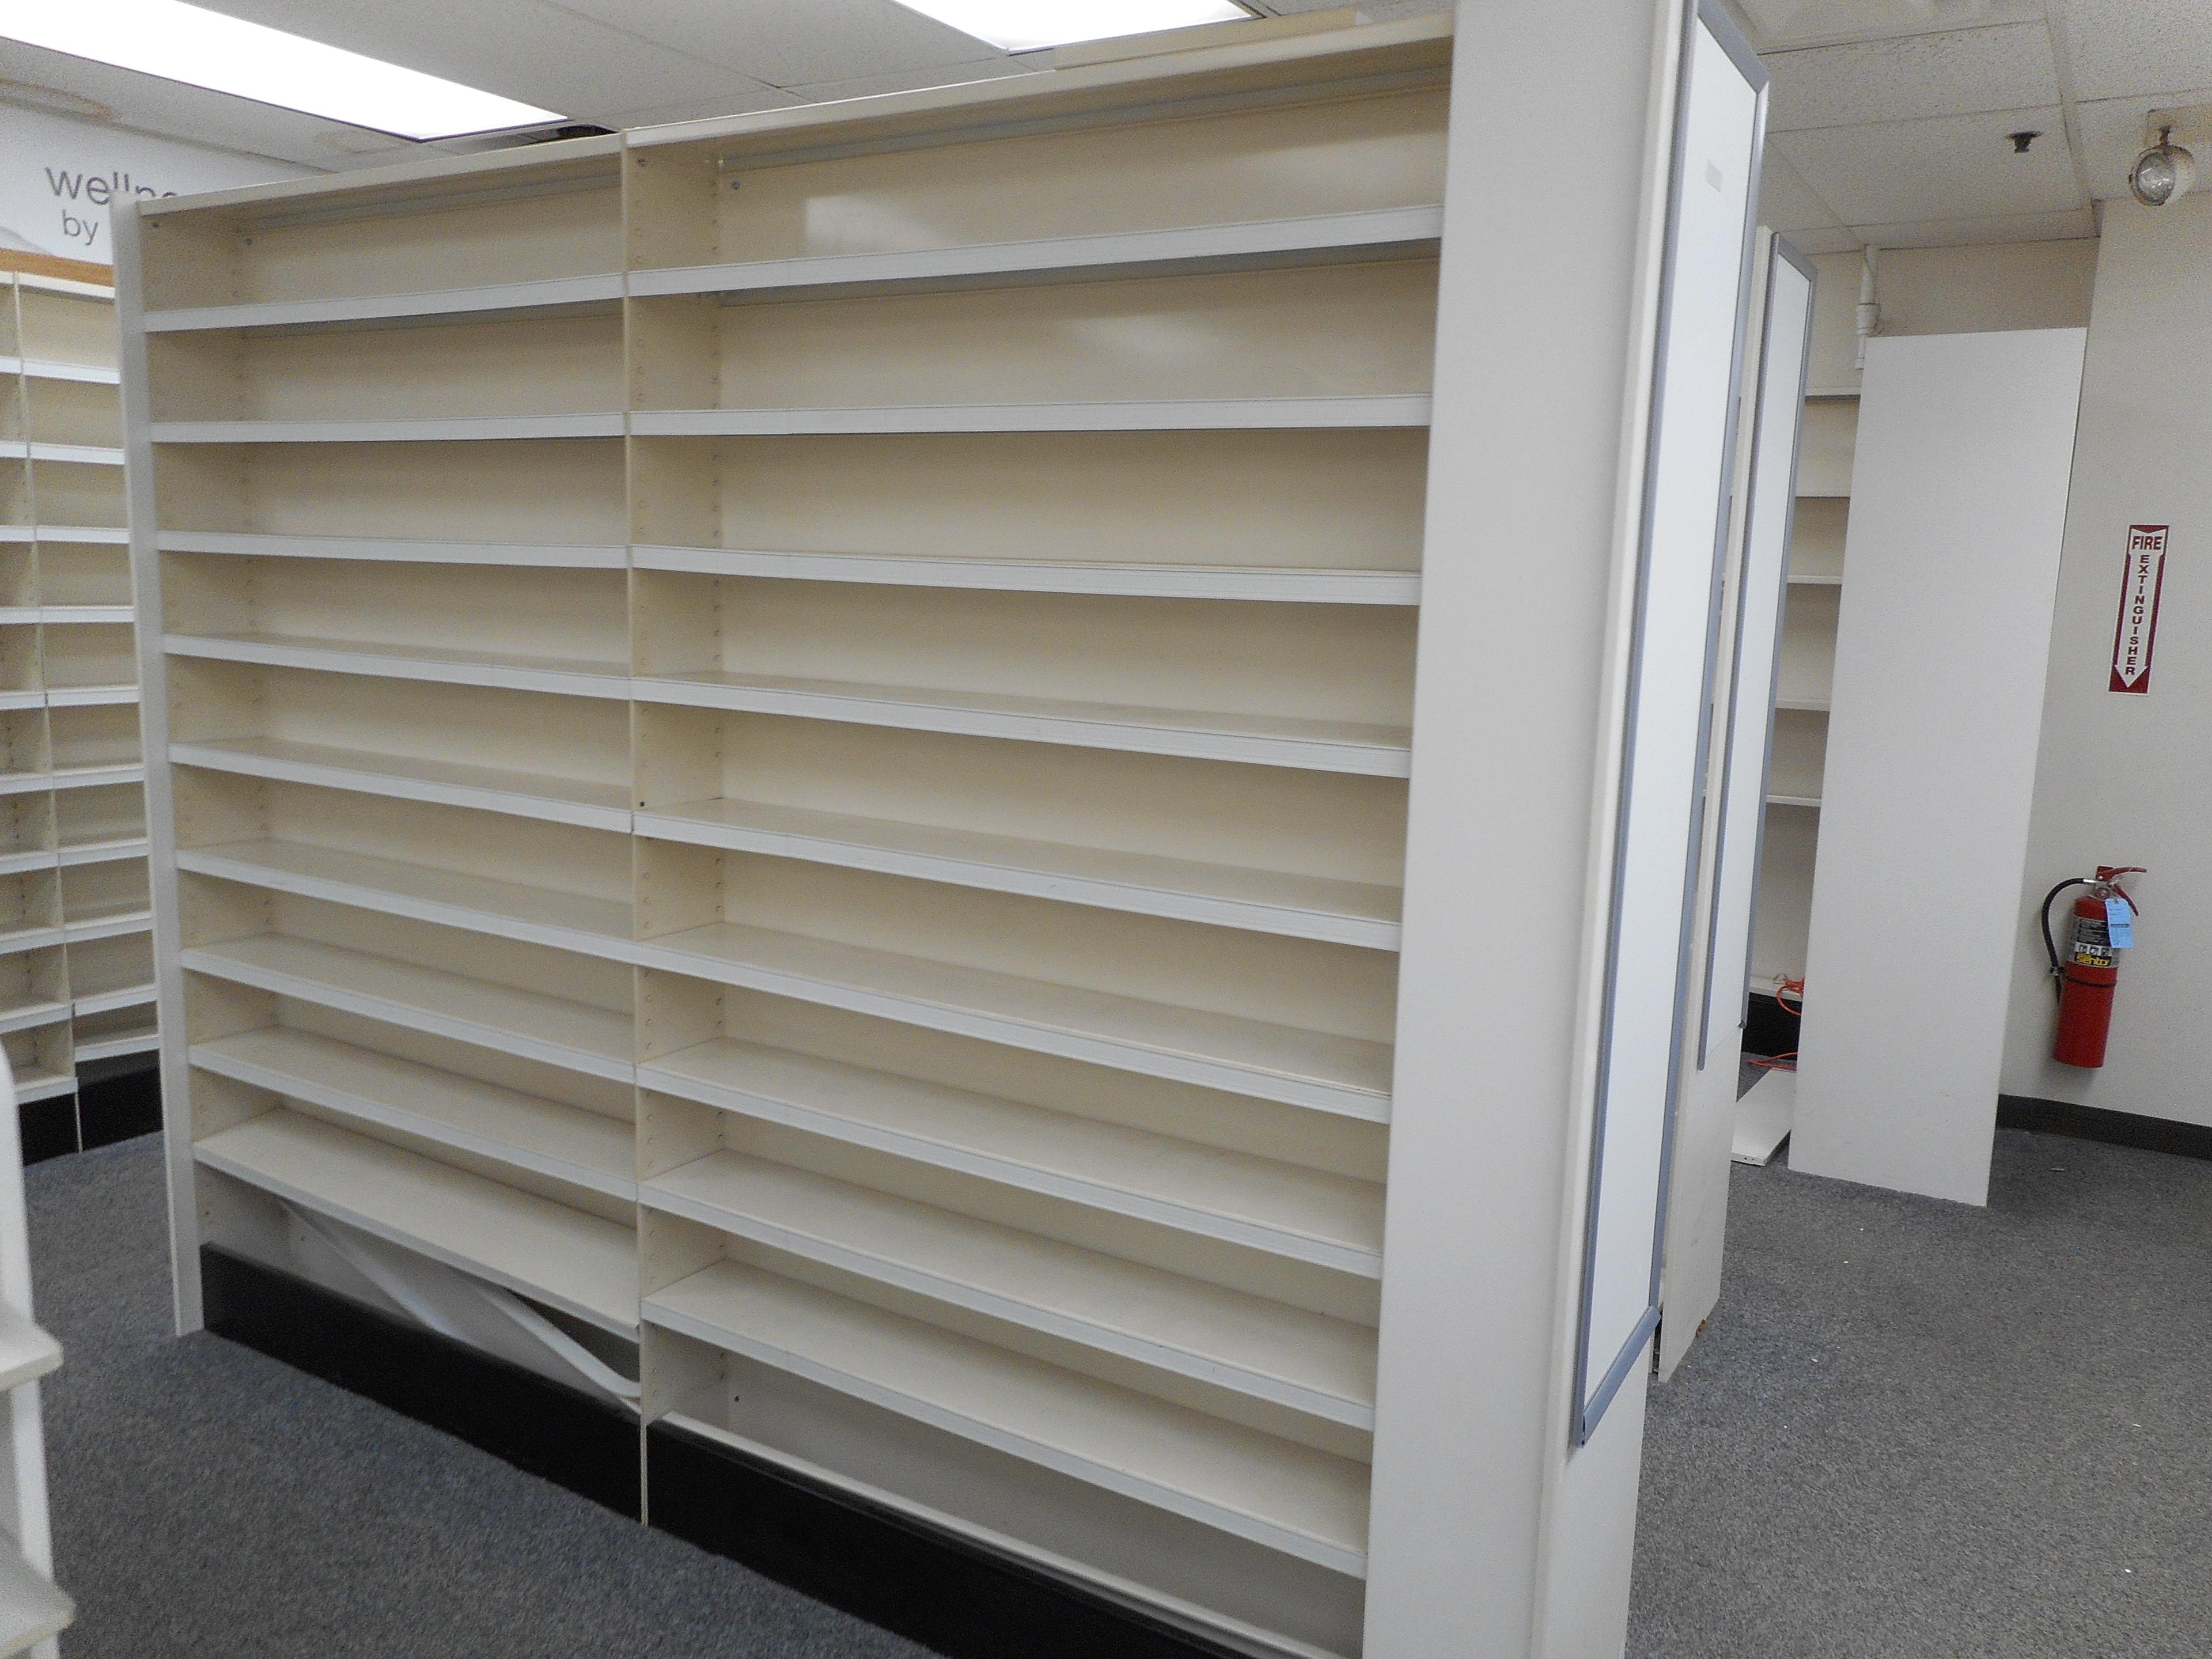 ALL PHARMACY SHELVING 8-2 SIDED SECTIONS AND 12 WALL SECTIONS